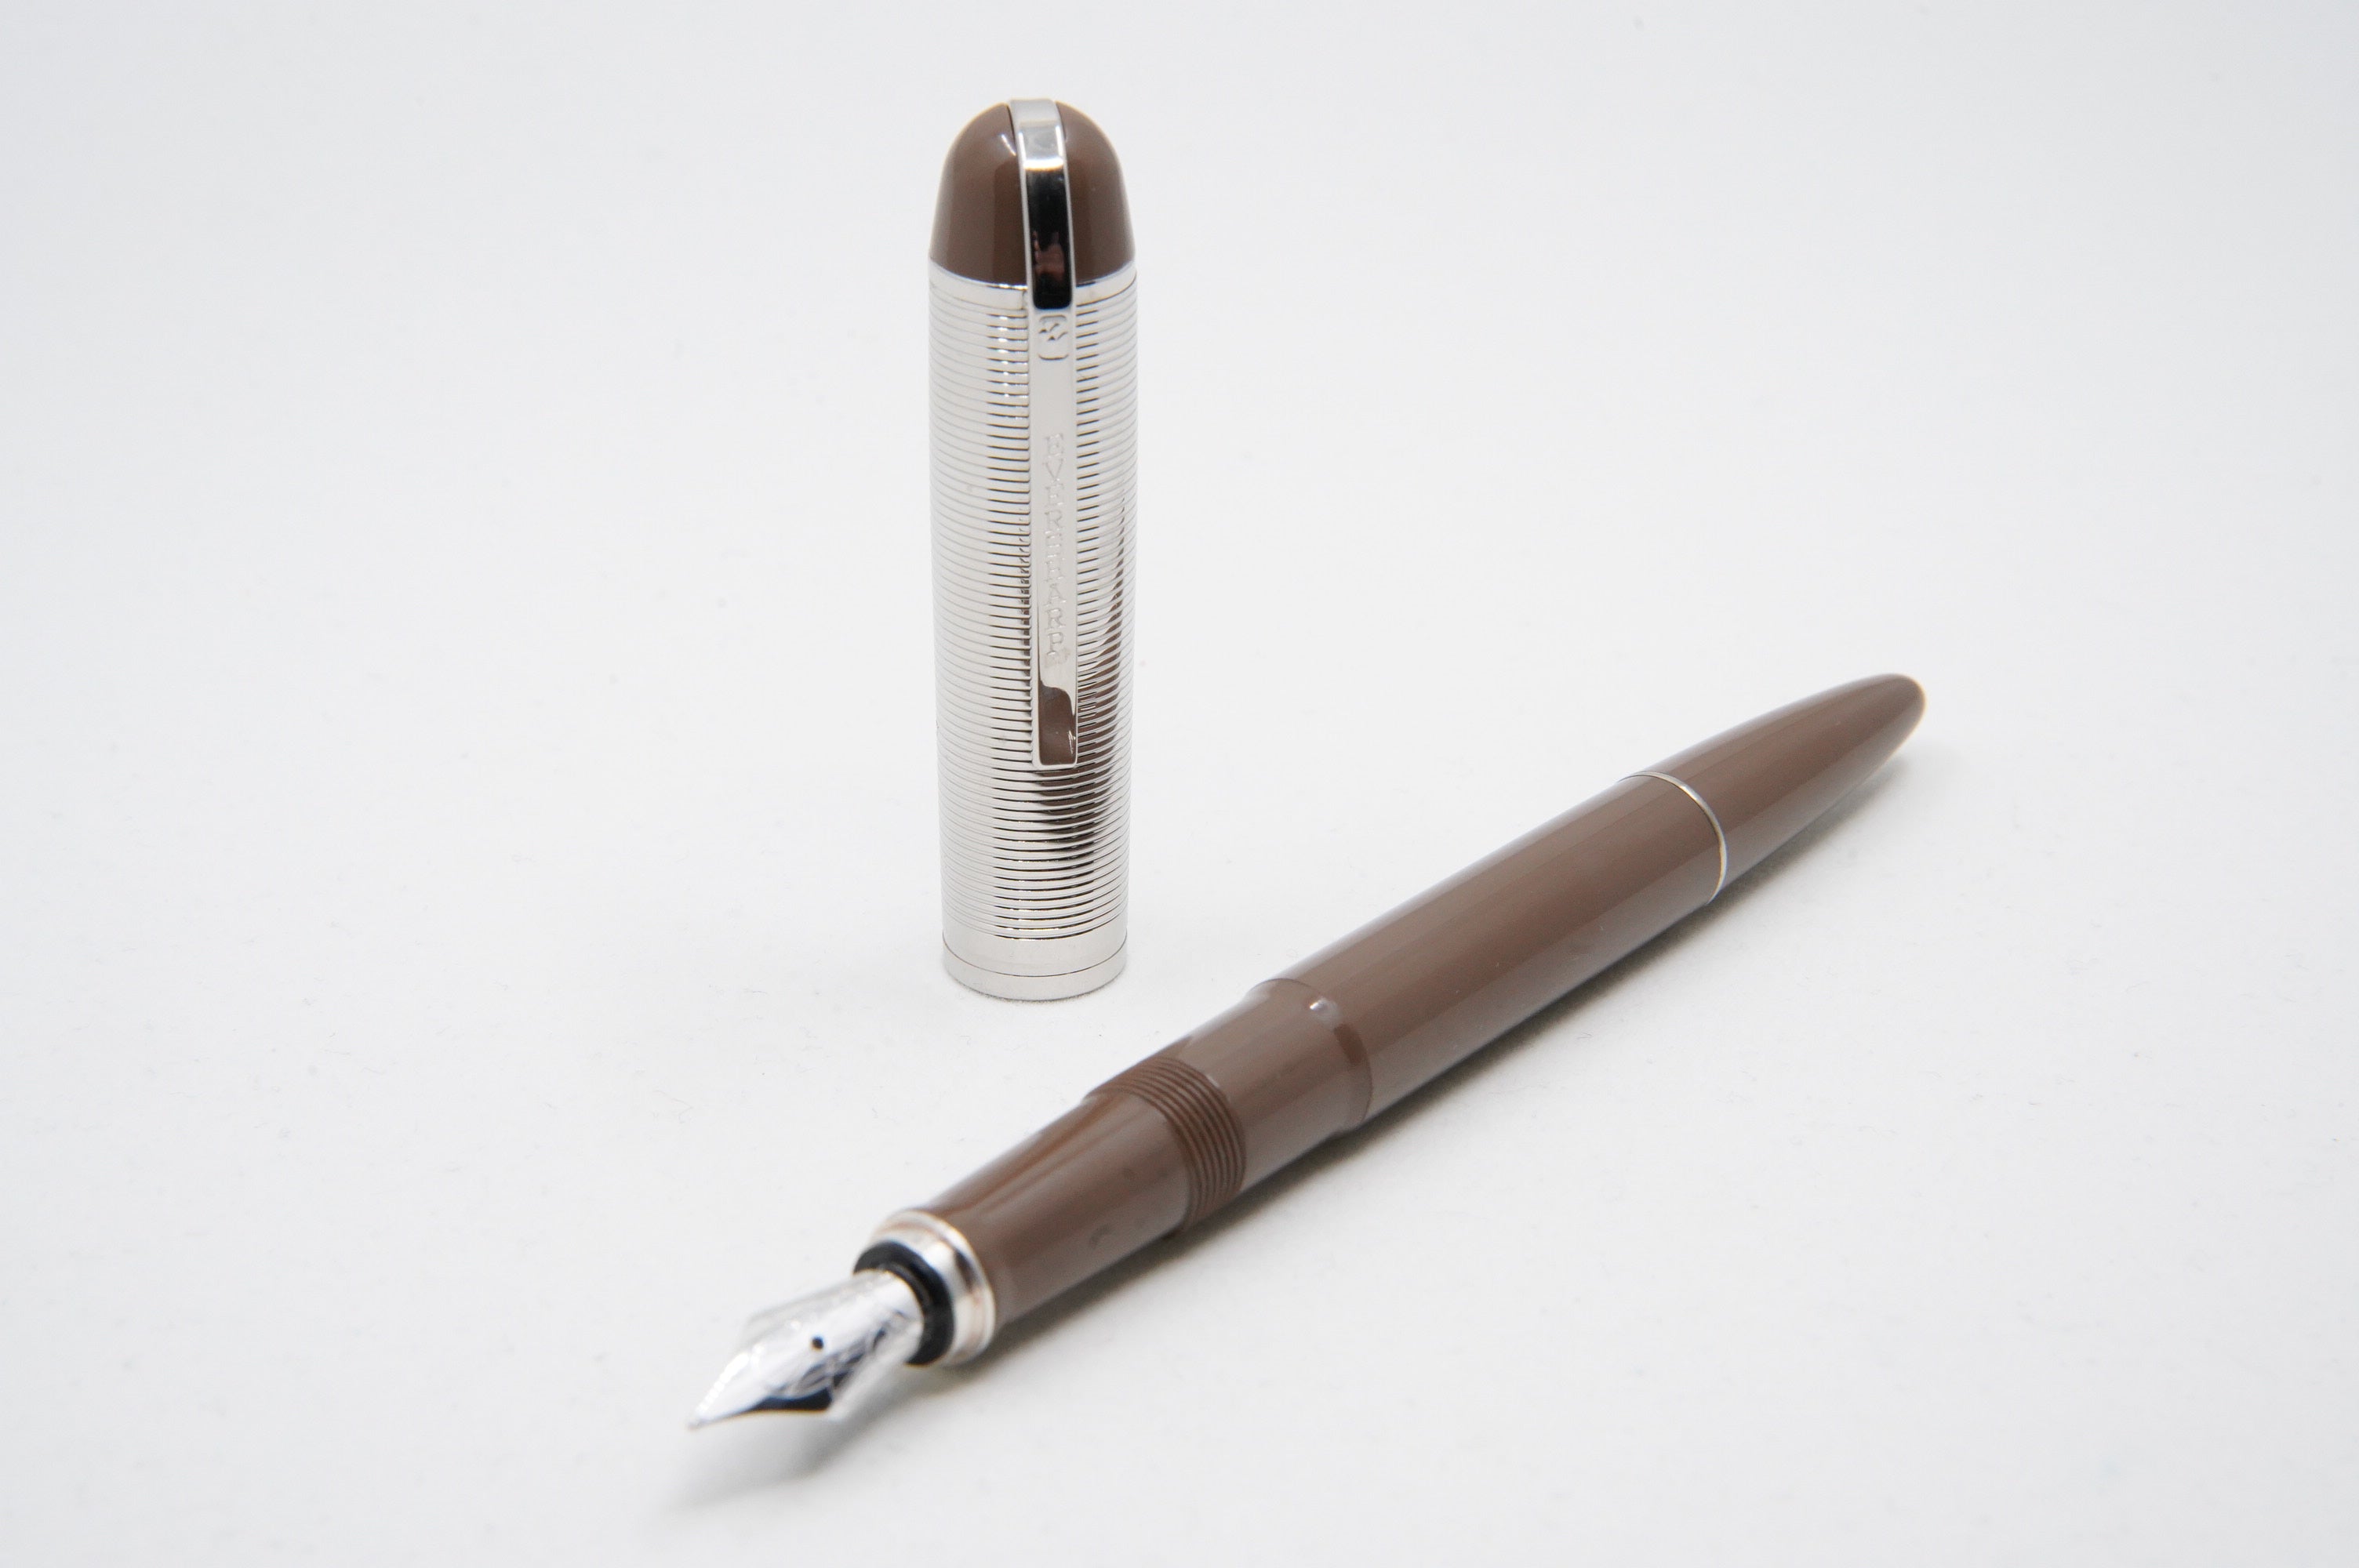 Wahl Eversharp Skyline FP Chocolate - The iconic SKYLINE created by Henry Dreyfus in 1939